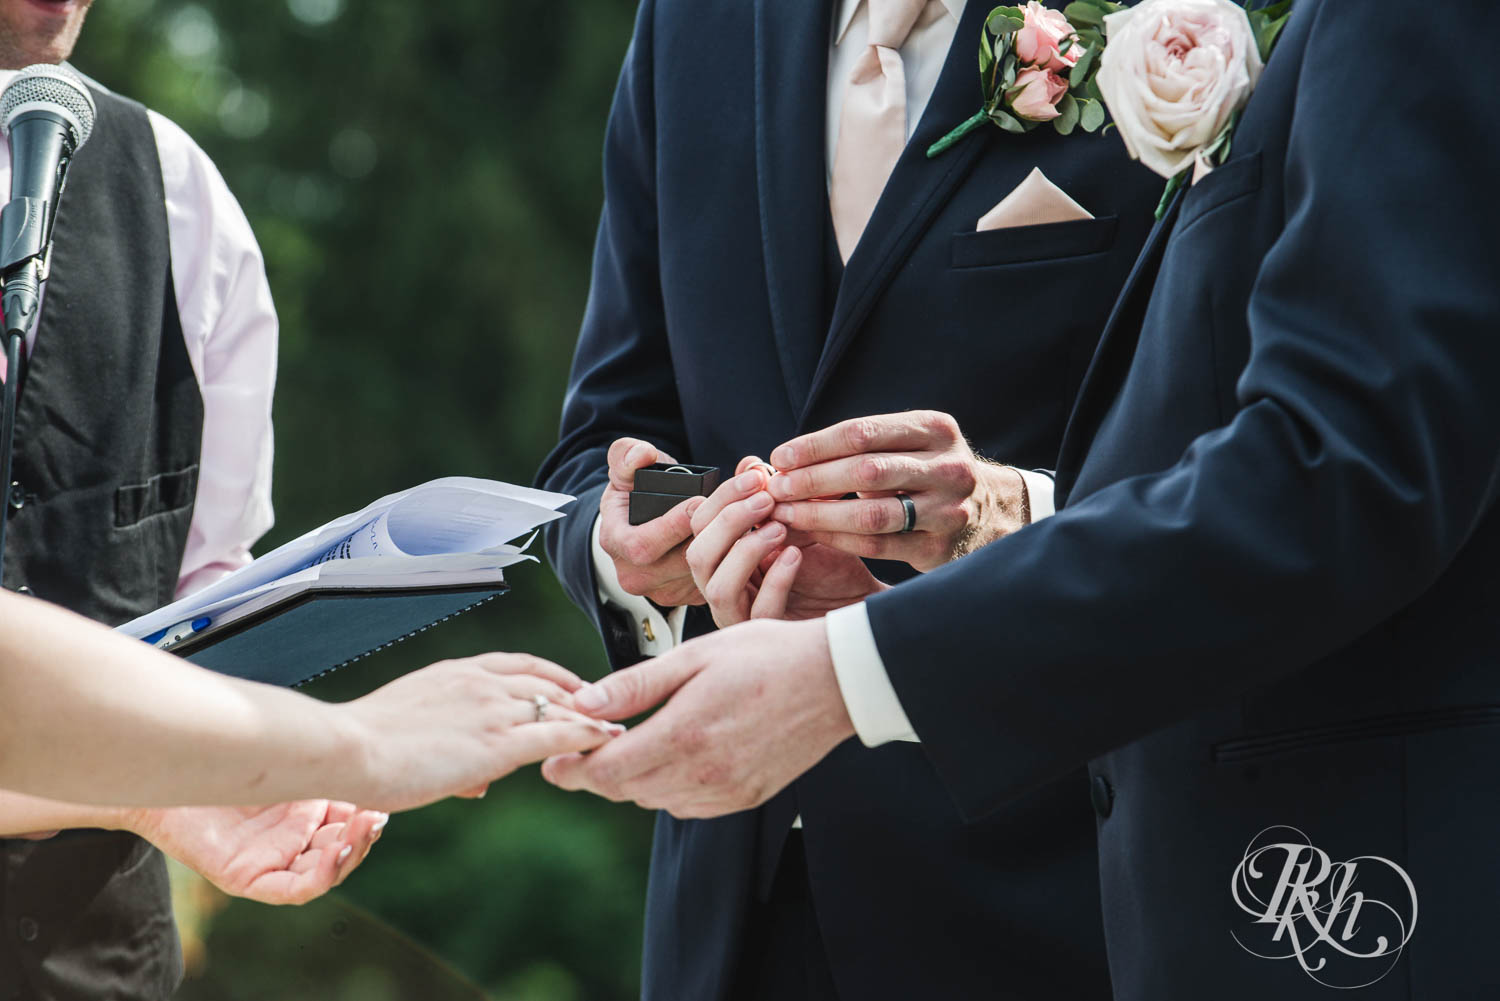 Bride and groom exchange rings during outdoor wedding ceremony at Earle Brown Heritage Center in Brooklyn Center, Minnesota.